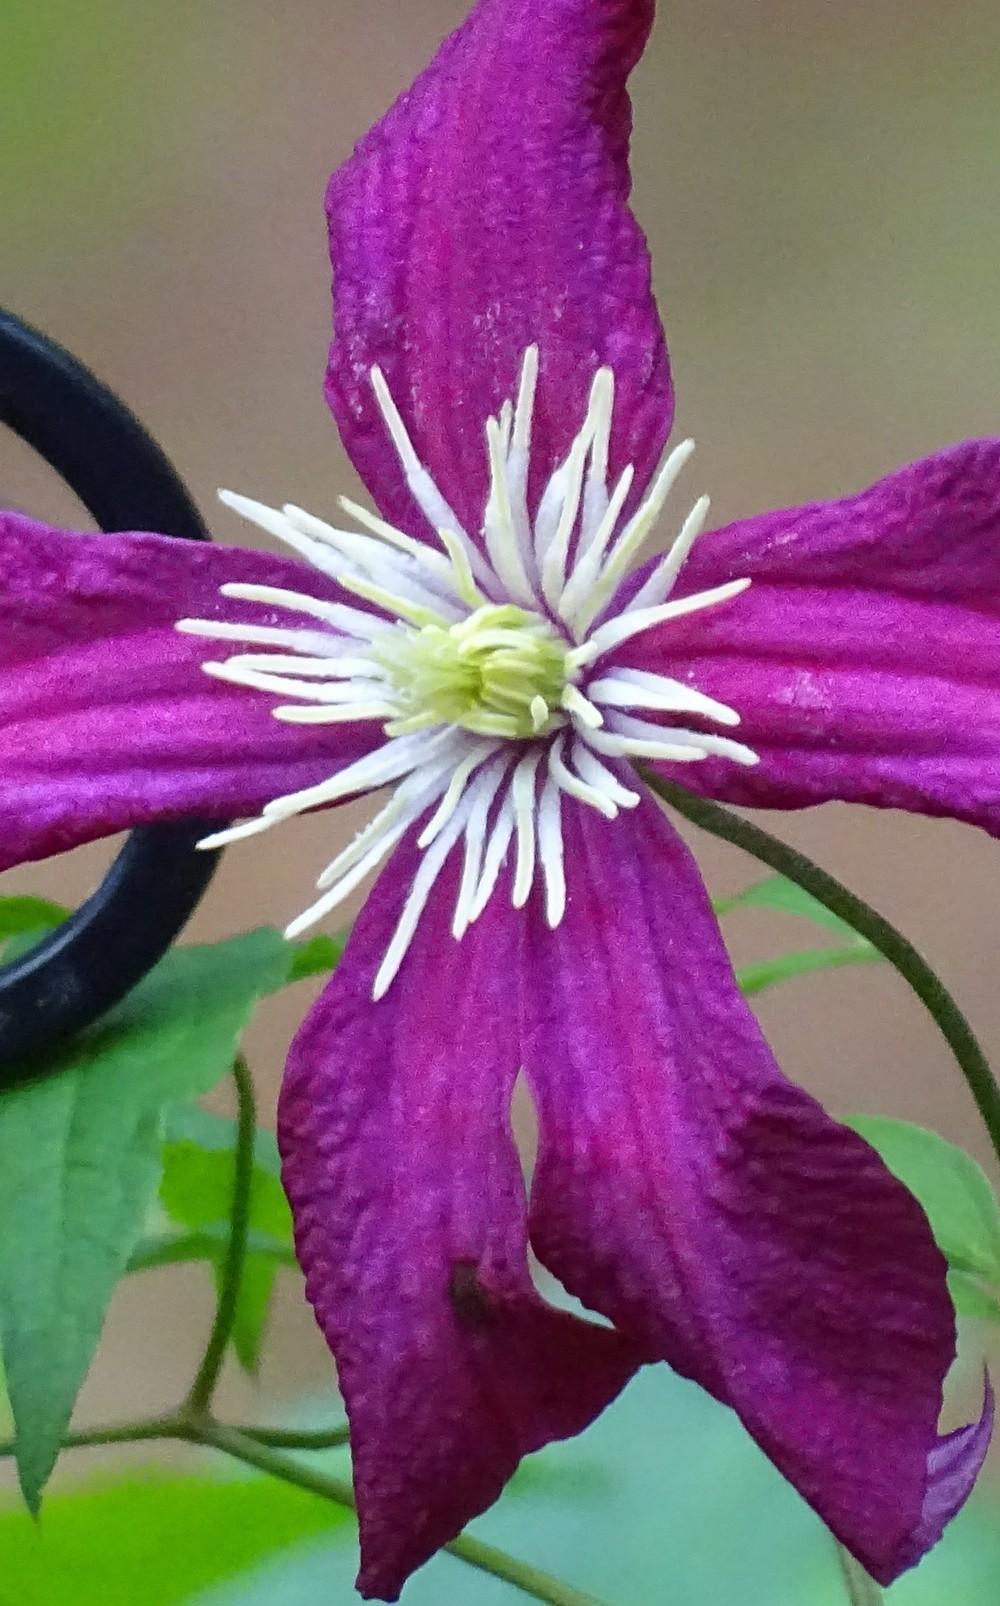 Photo of Clematis (Clematis viticella 'Madame Julia Correvon') uploaded by Sheridragonfly